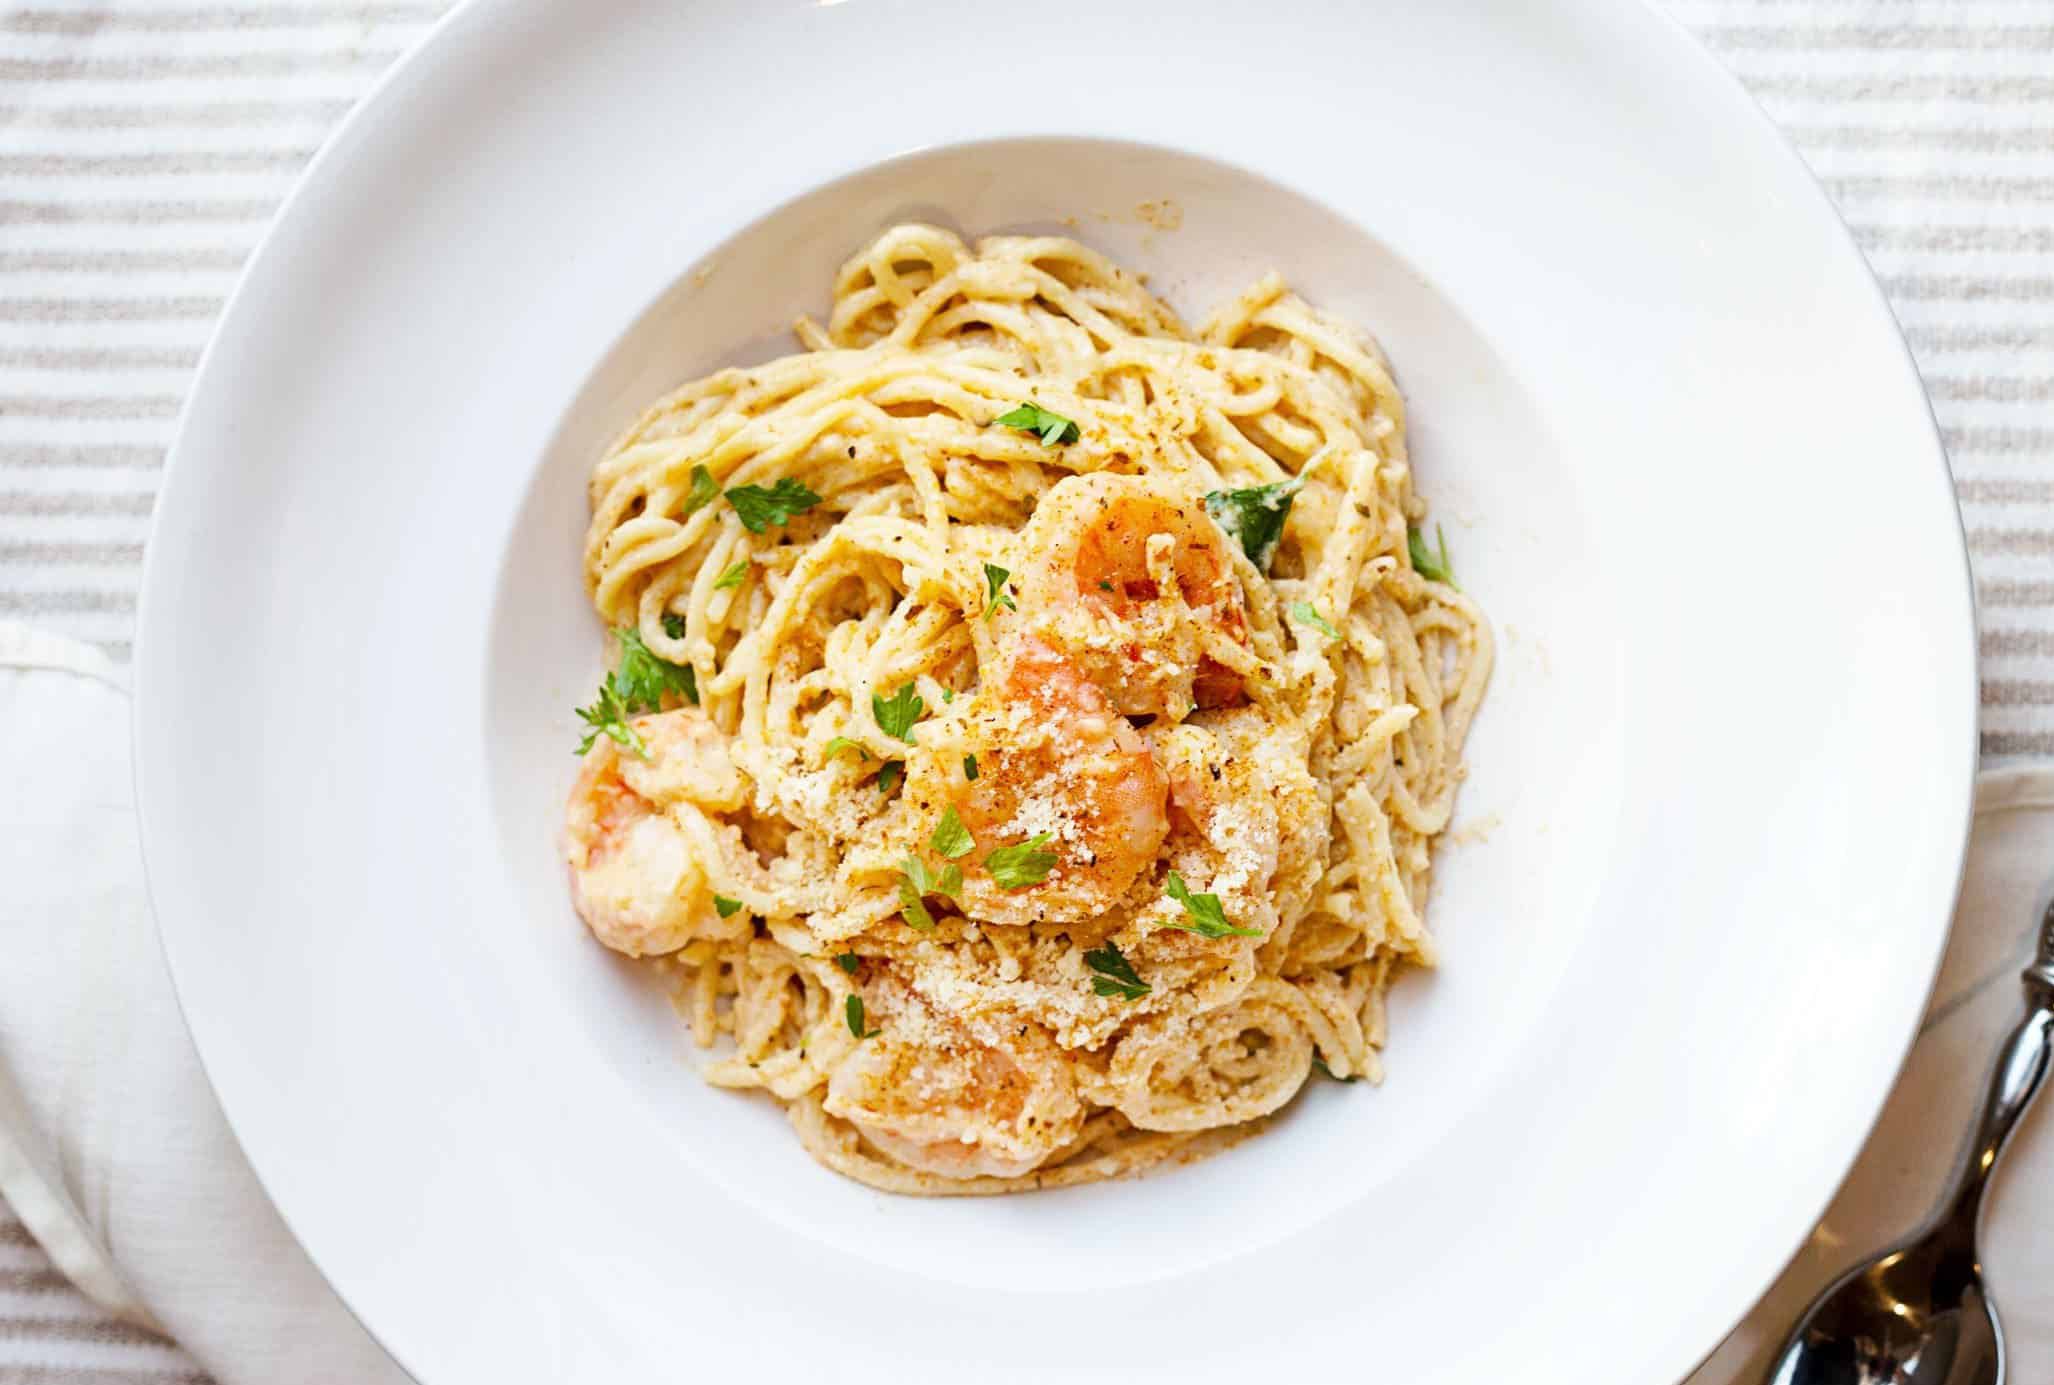 New Shrimp, Cajun Chicken and Crab Linguine Alfredo Family Meals Arrive at Red Lobster Starting at $27.99